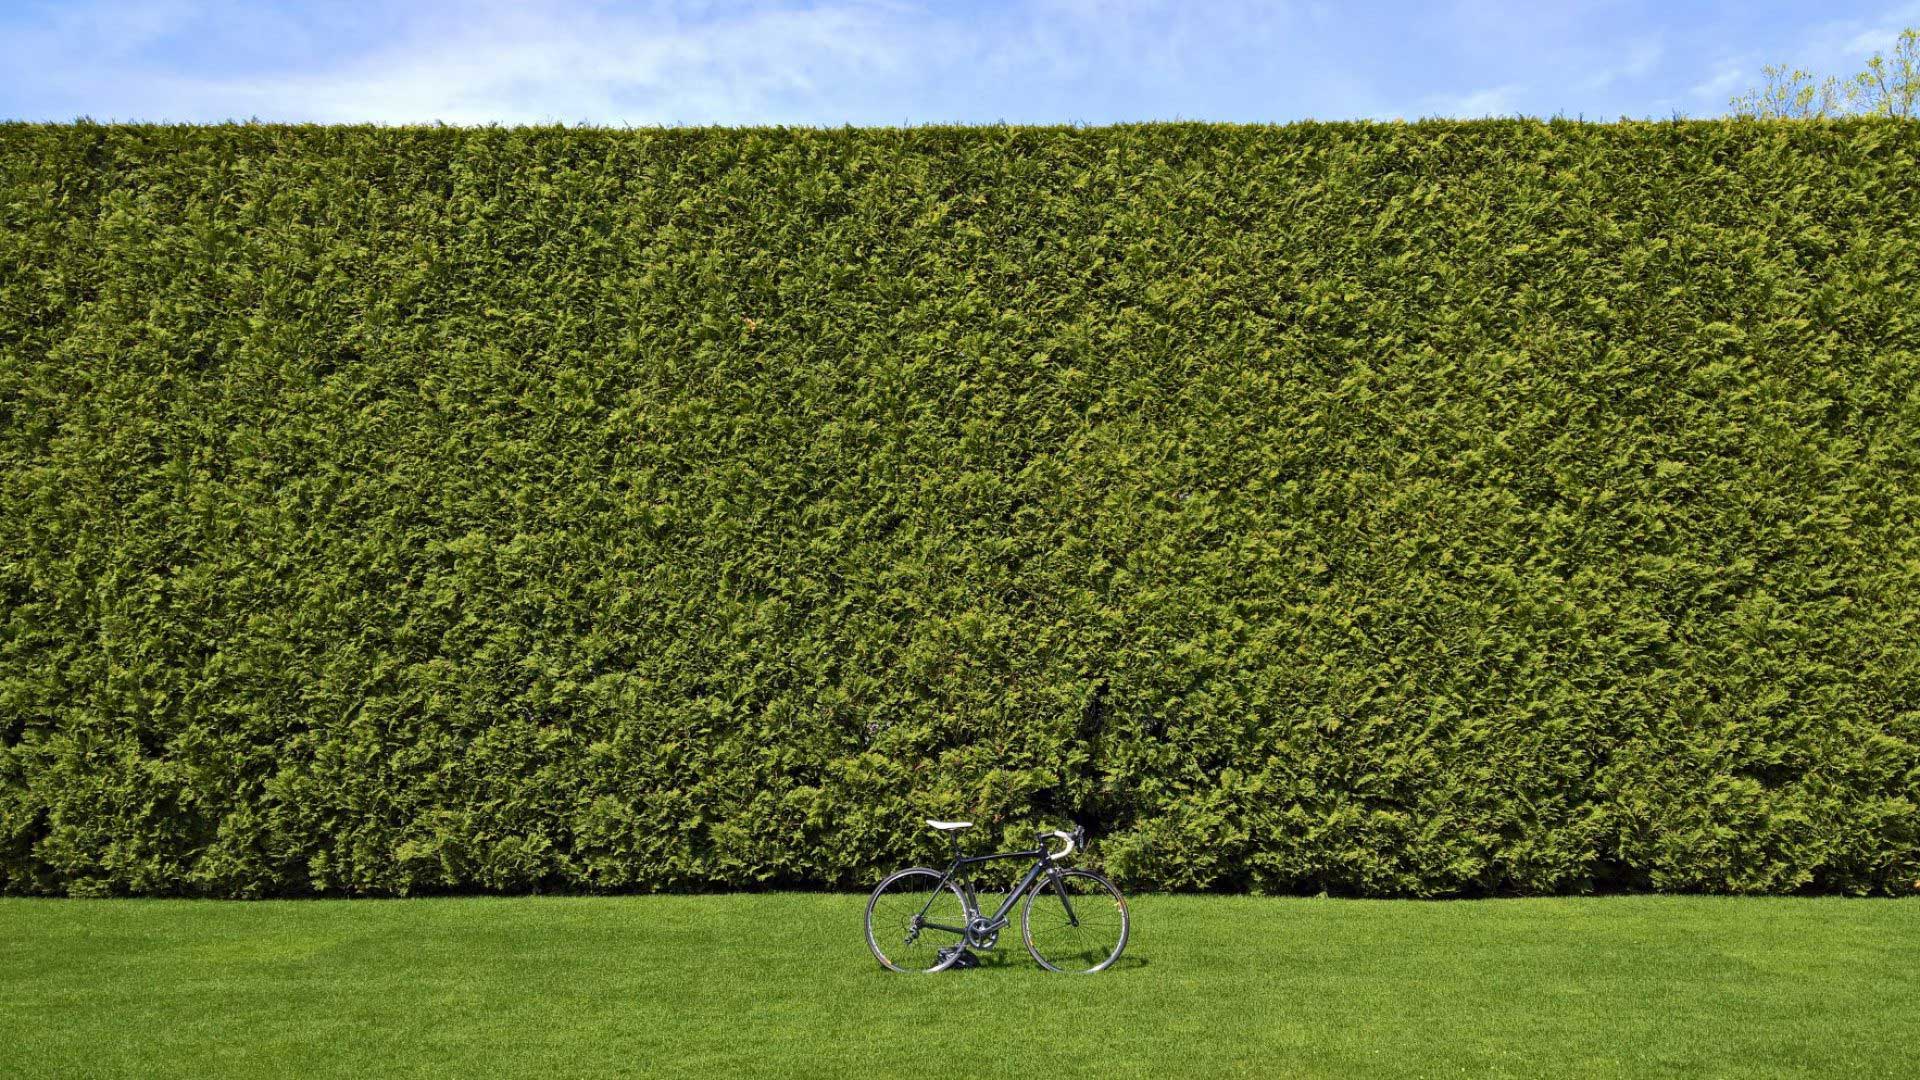 Shrubbery with Bike